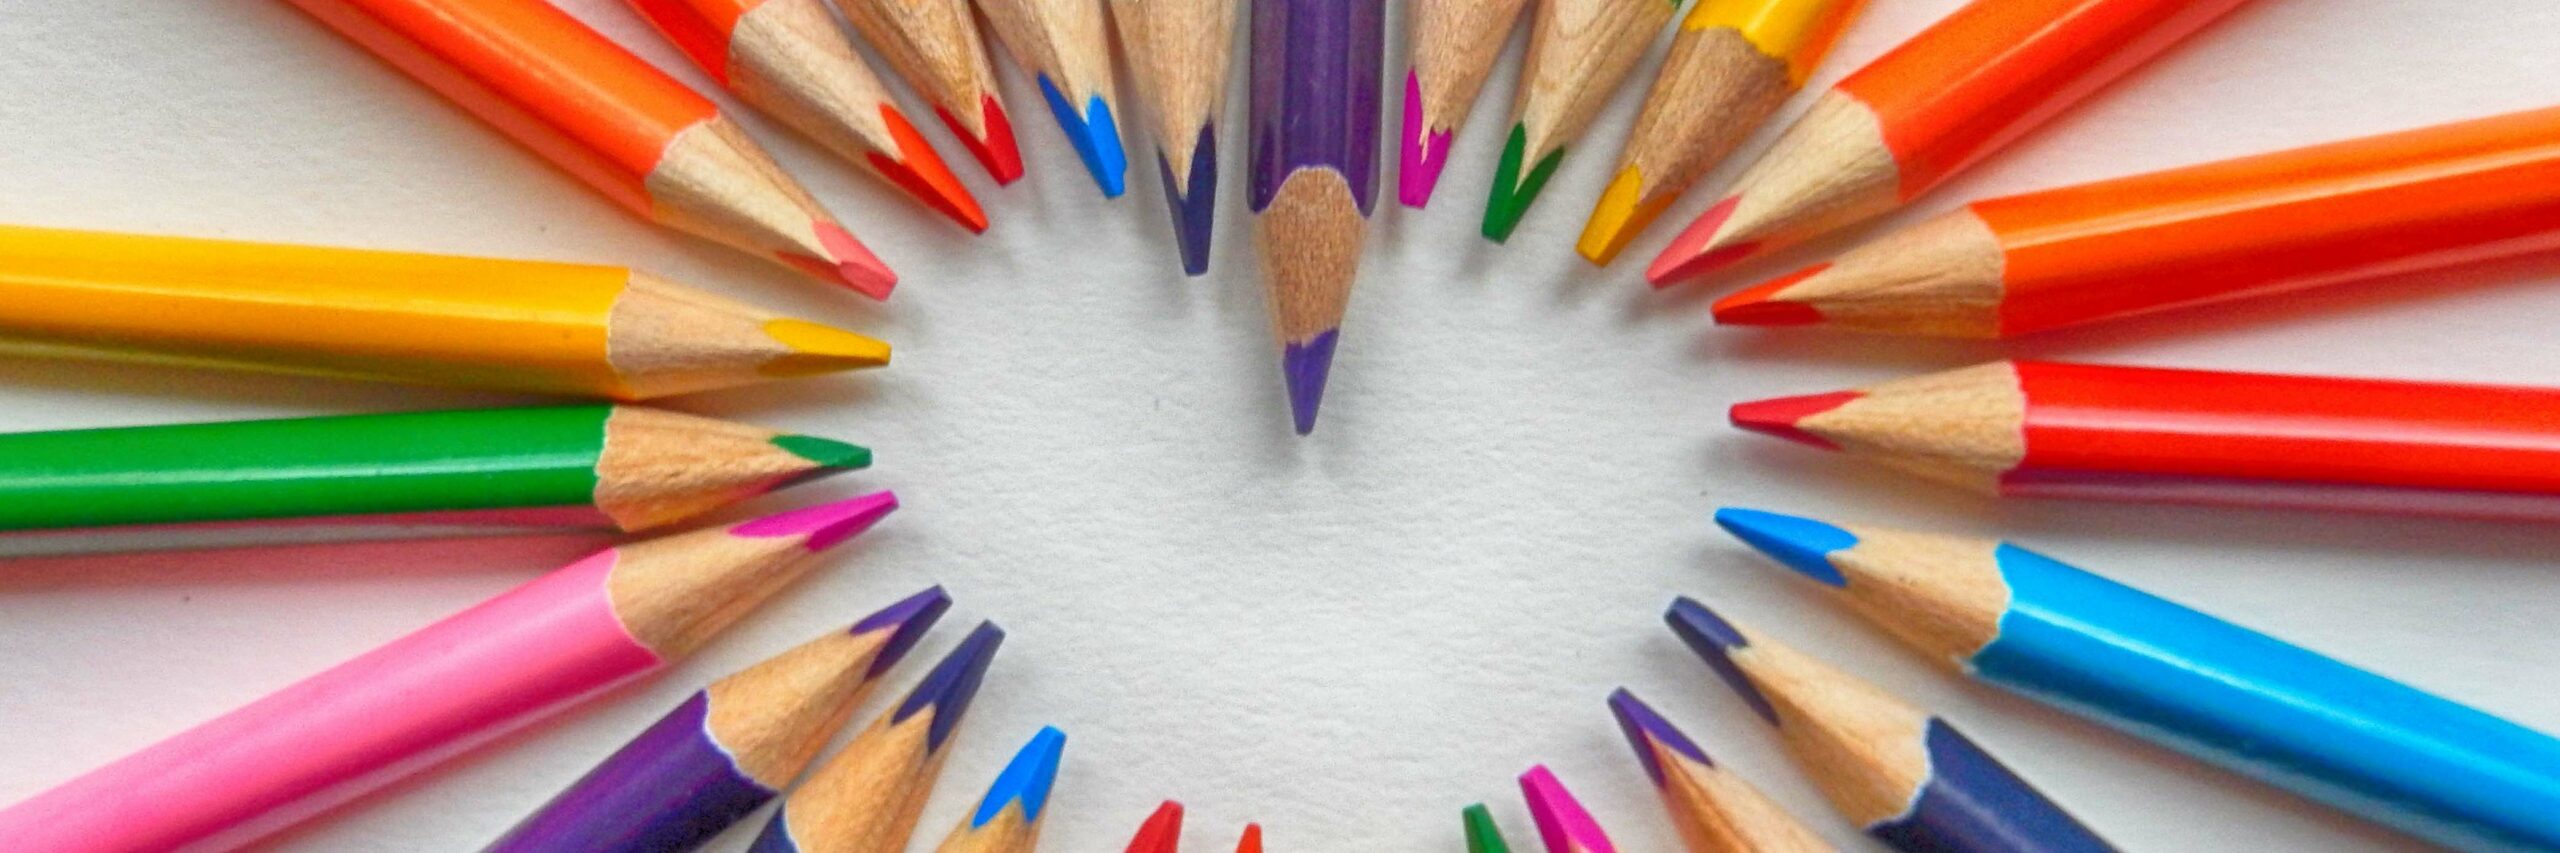 colourful pencil crayons form a heart